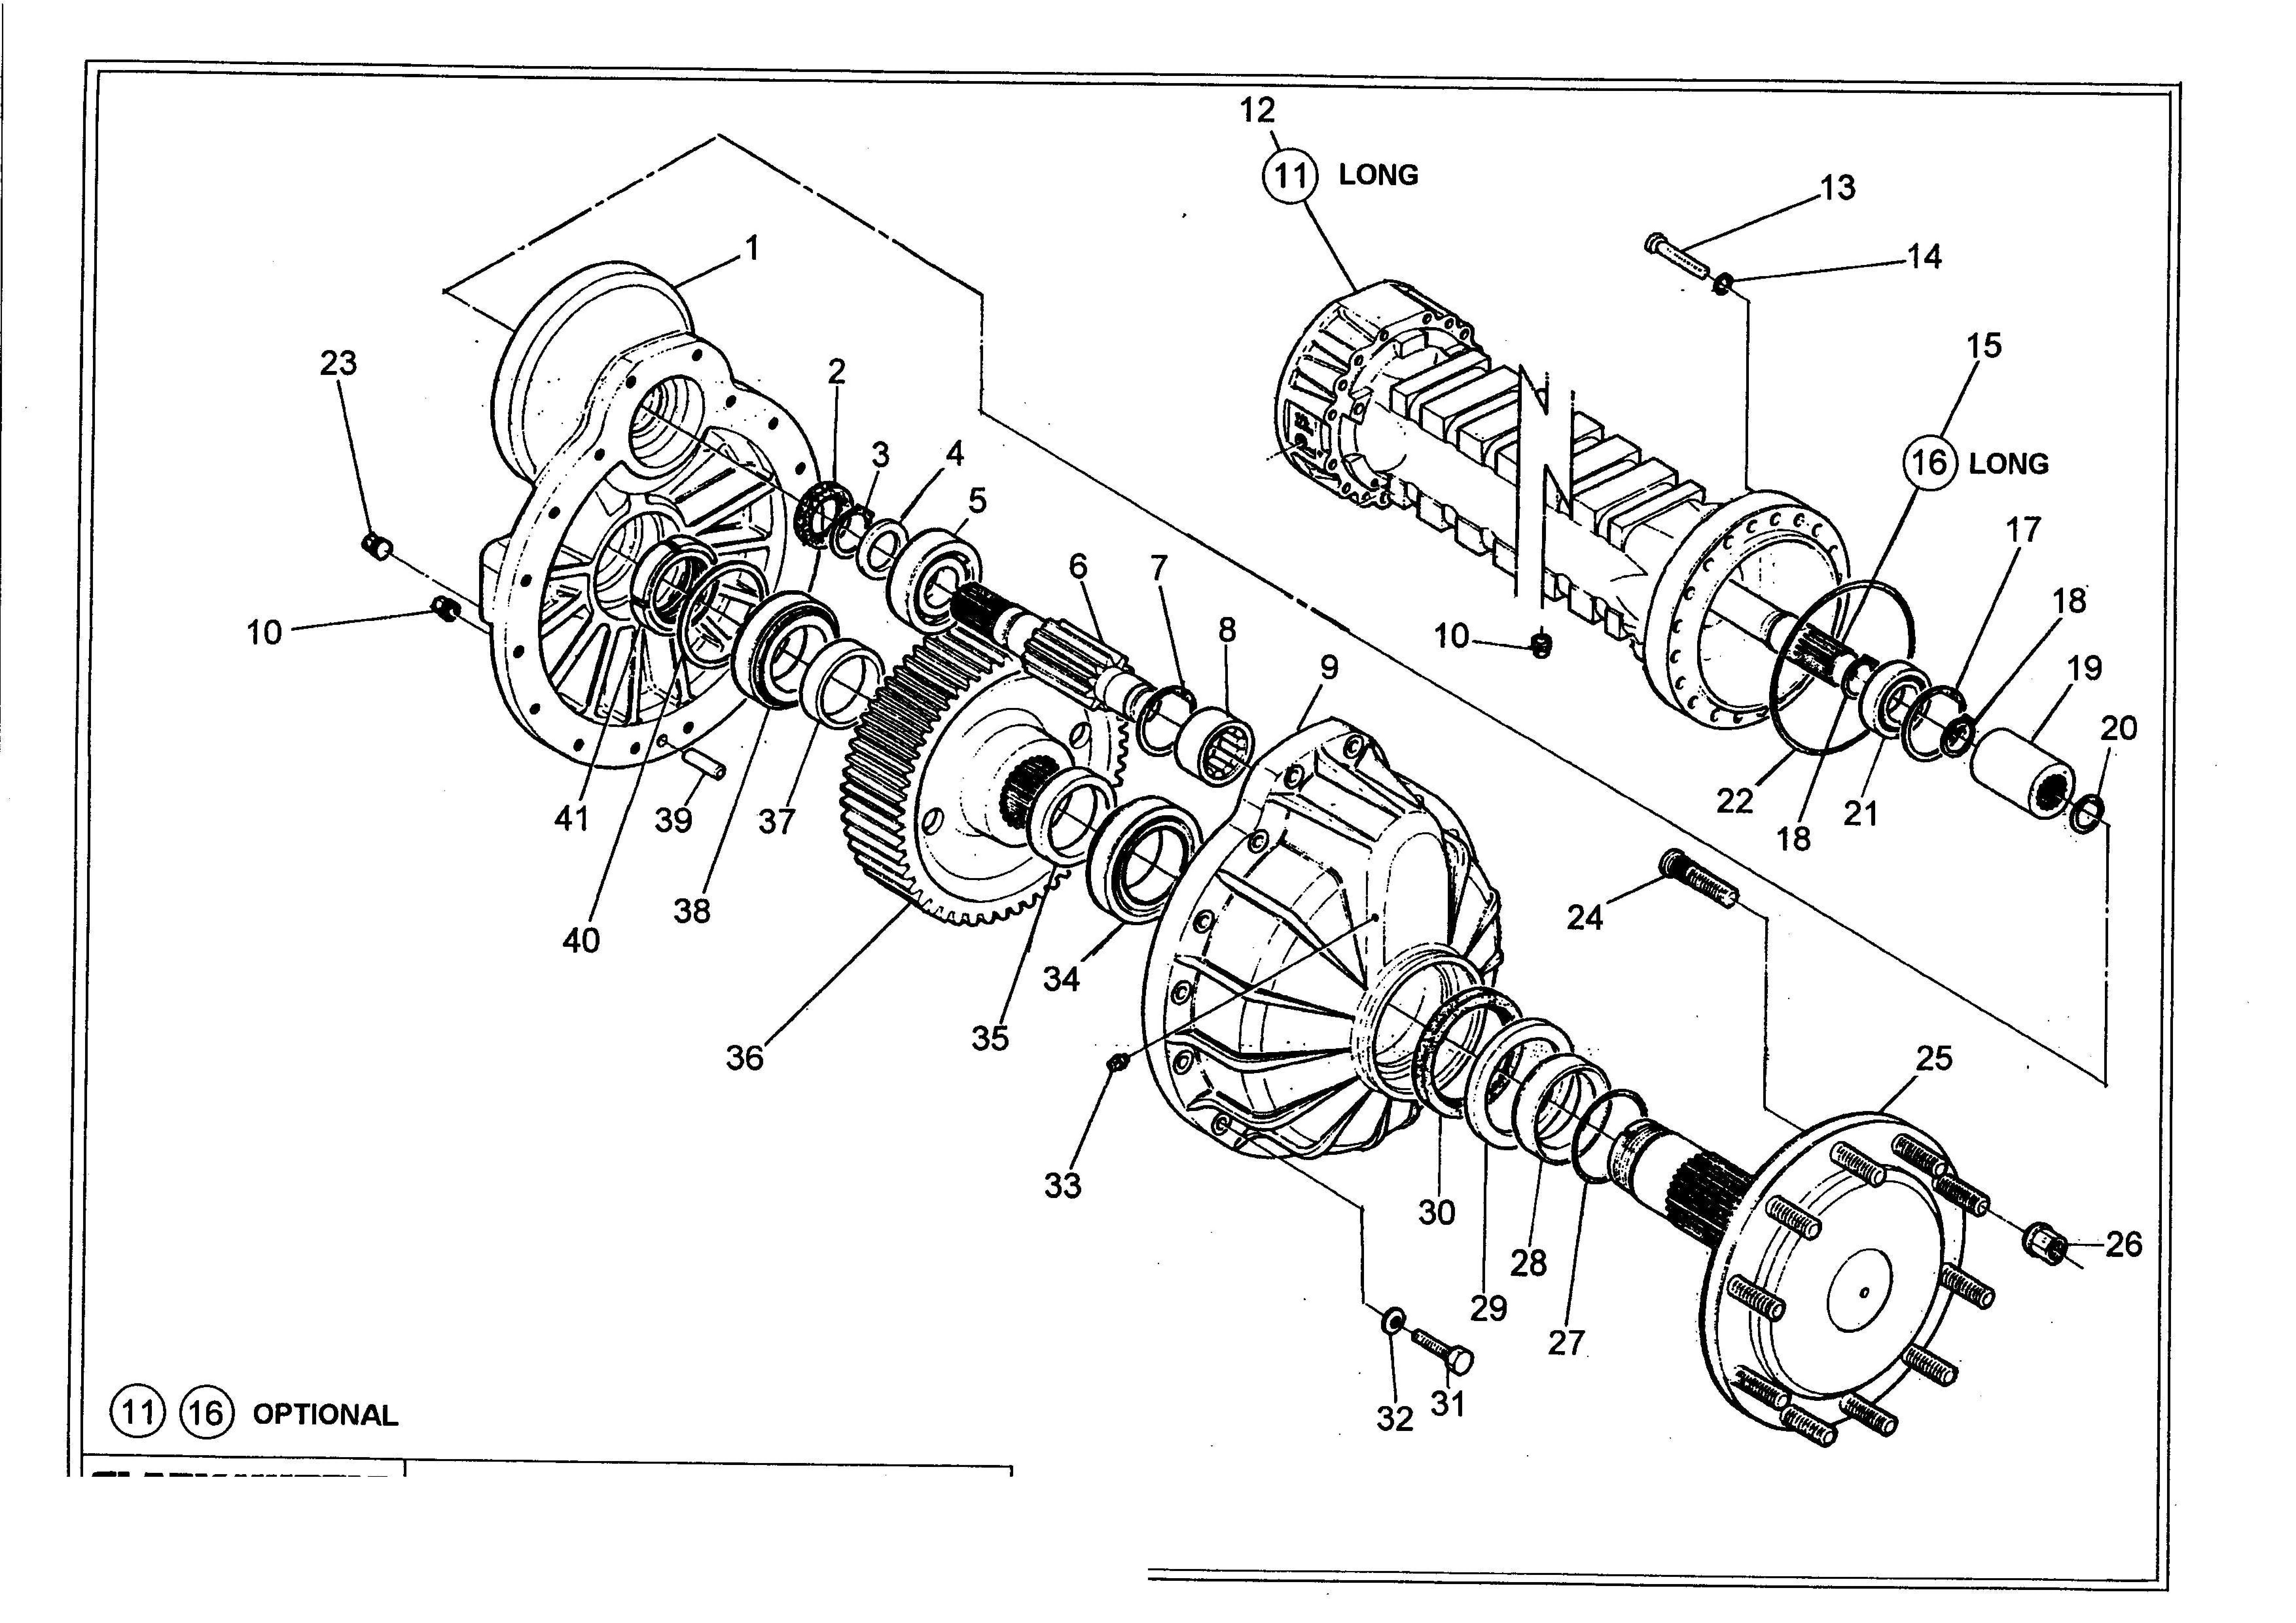 drawing for HSM HOHENLOHER 1409 - COVER (figure 1)